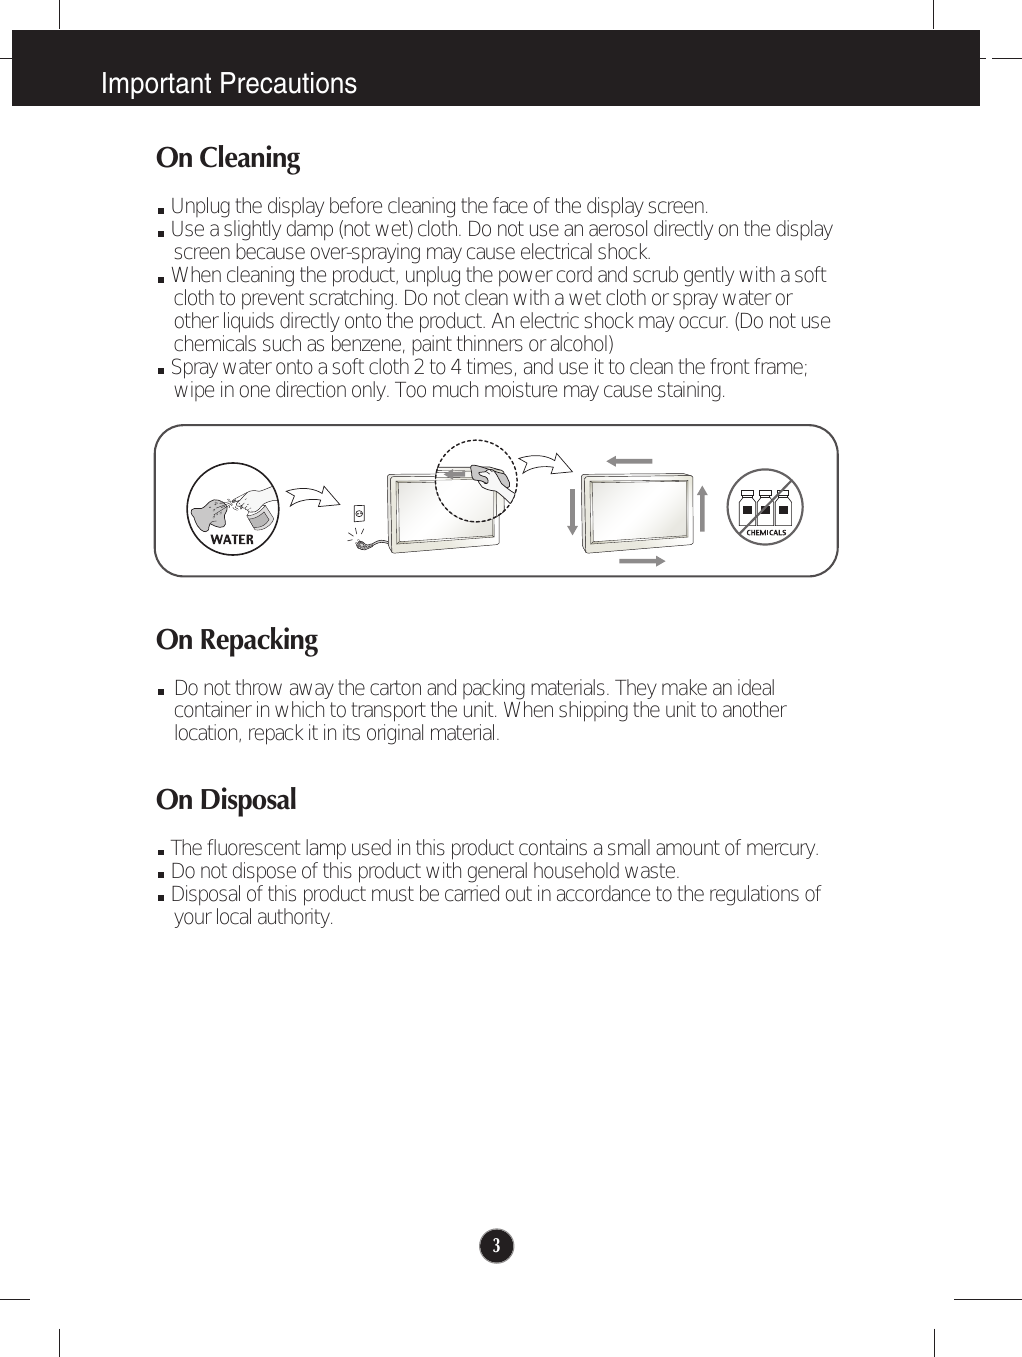 Important Precautions3On CleaningUnplug the display before cleaning the face of the display screen.Use a slightly damp (not wet) cloth. Do not use an aerosol directly on the displayscreen because over-spraying may cause electrical shock.When cleaning the product, unplug the power cord and scrub gently with a softcloth to prevent scratching. Do not clean with a wet cloth or spray water orother liquids directly onto the product. An electric shock may occur. (Do not usechemicals such as benzene, paint thinners or alcohol) Spray water onto a soft cloth 2 to 4 times, and use it to clean the front frame;wipe in one direction only. Too much moisture may cause staining.  On RepackingDo not throw away the carton and packing materials. They make an idealcontainer in which to transport the unit. When shipping the unit to anotherlocation, repack it in its original material.On DisposalThe fluorescent lamp used in this product contains a small amount of mercury.Do not dispose of this product with general household waste.Disposal of this product must be carried out in accordance to the regulations ofyour local authority.